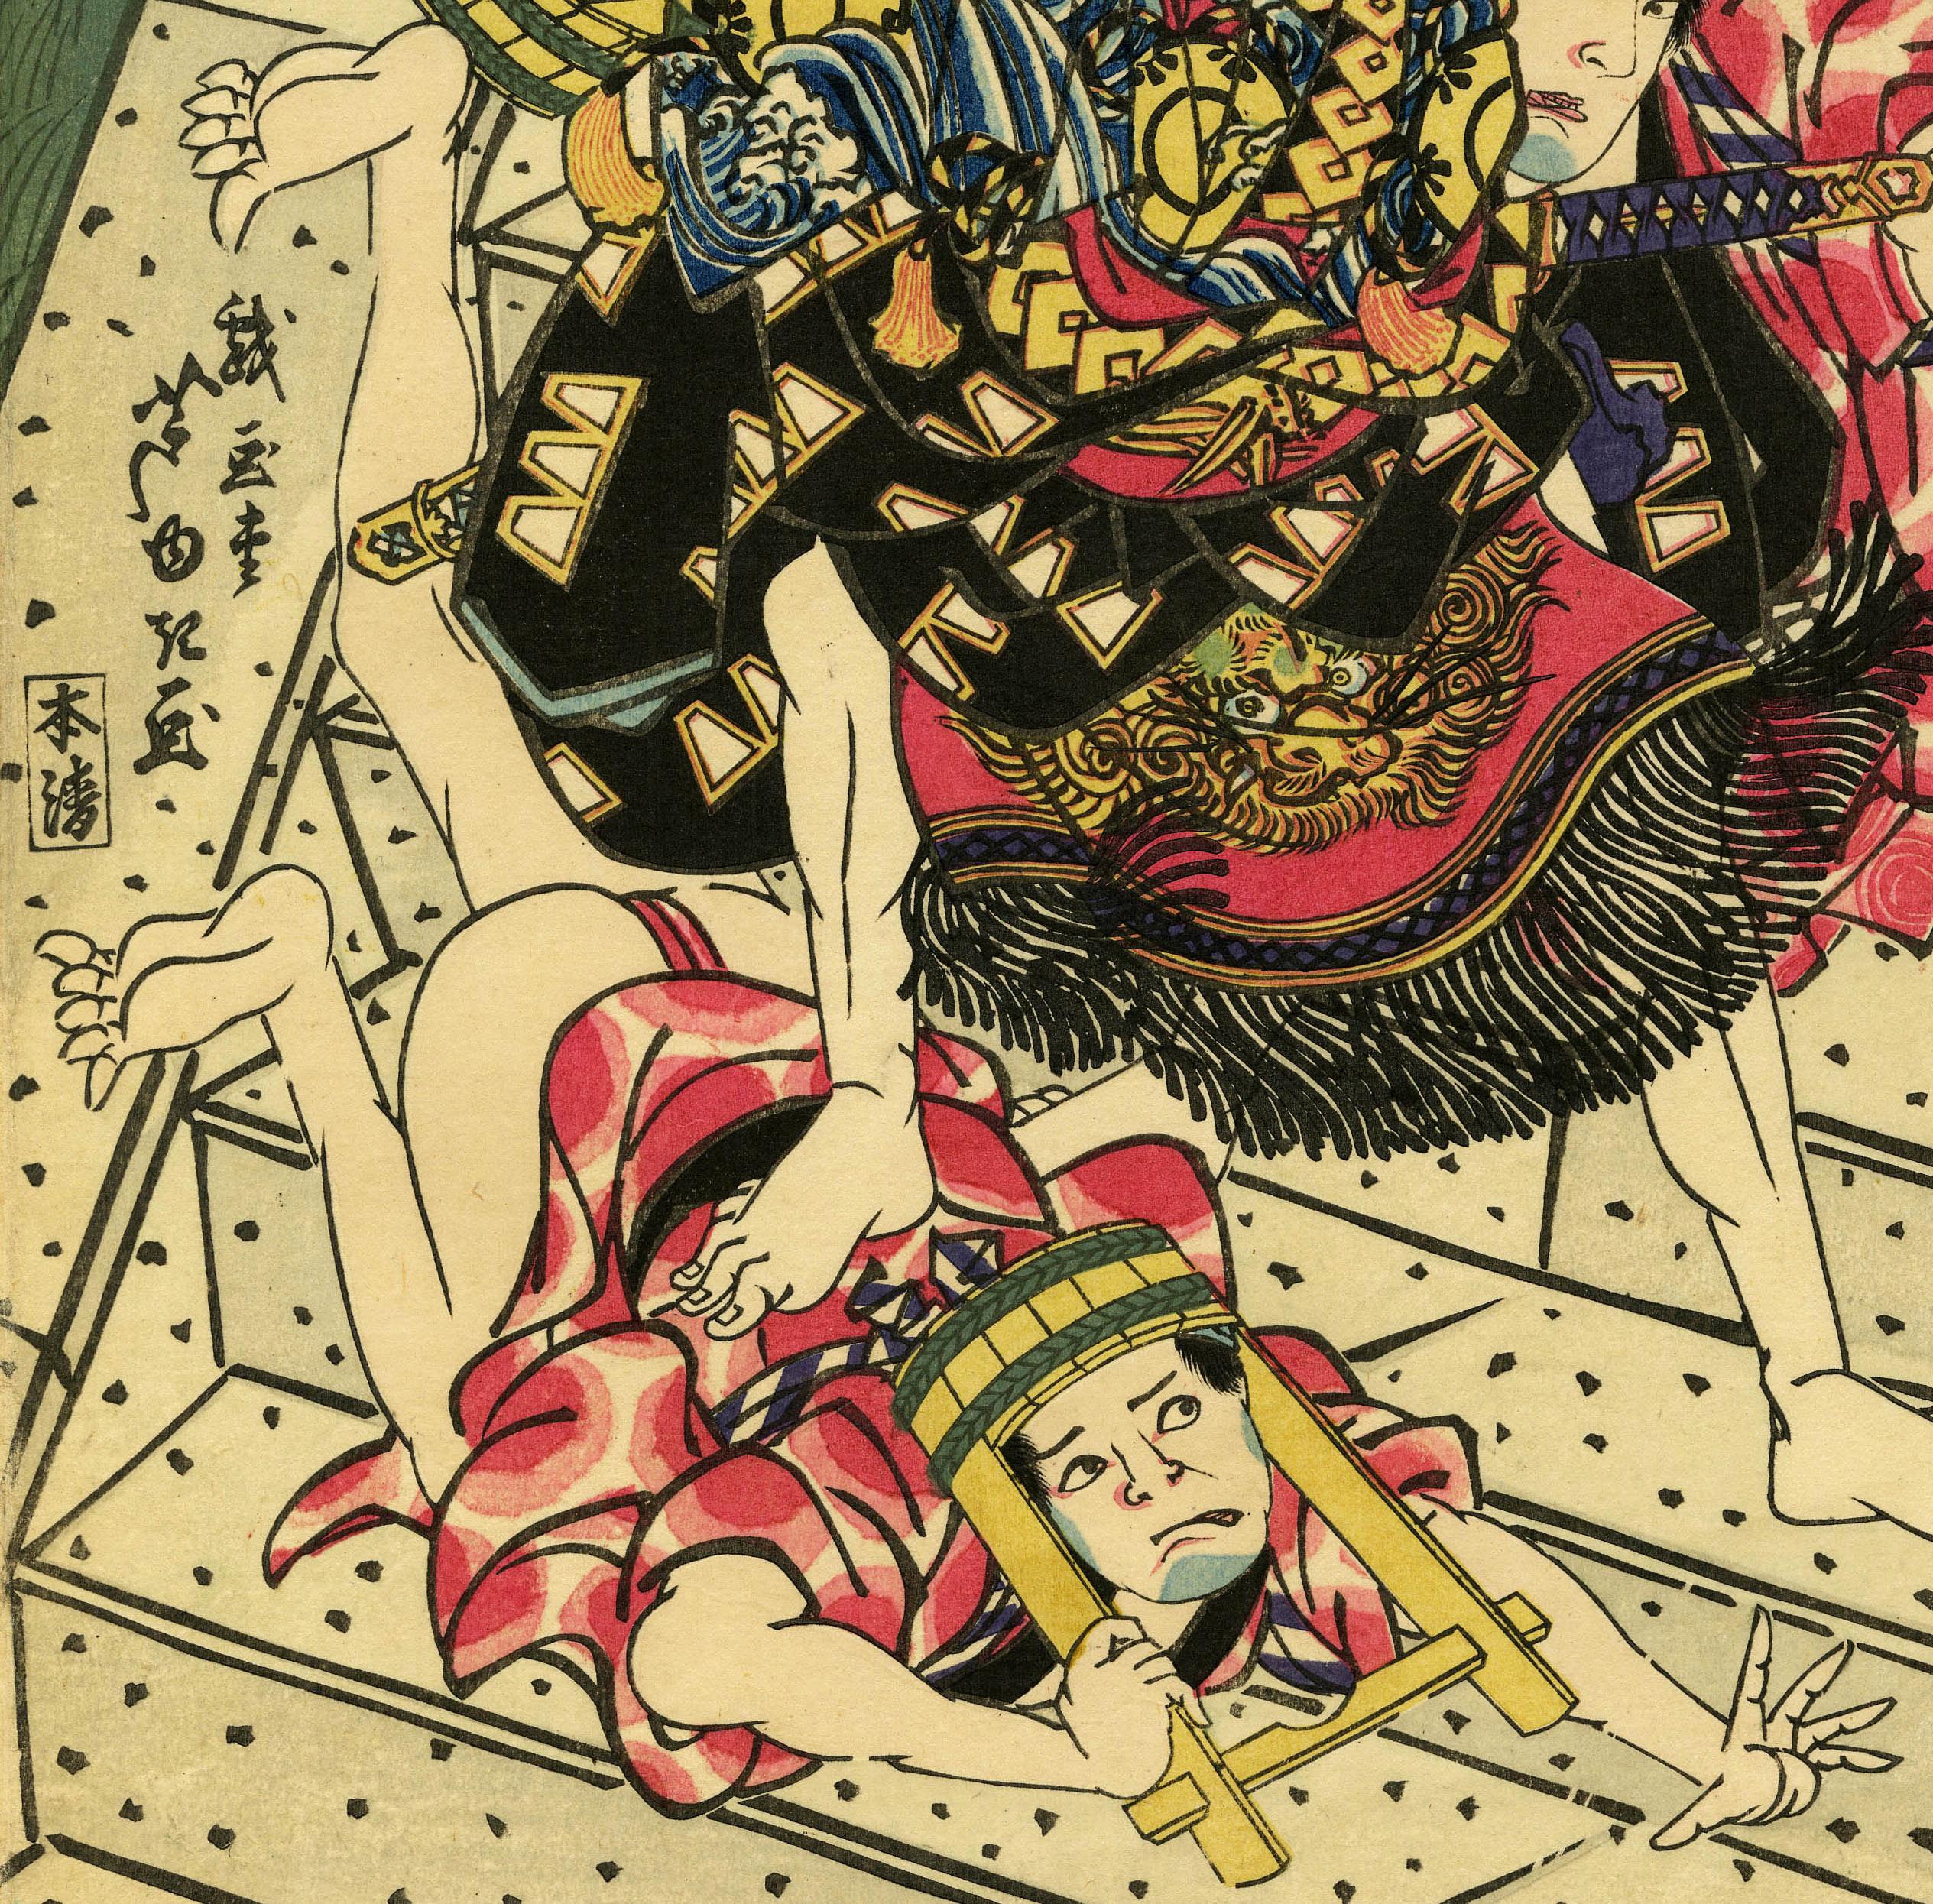 Arashi Rikan II in an Osaka Kabuki Scene
Color woodcut, c. 1827
Signed middle left (see photo)
Titled upper left (see photo)
Format: oban
Publisher: Honsei
The actor, in character, dispatches three robbers on a flight of stone steps.
Condition: